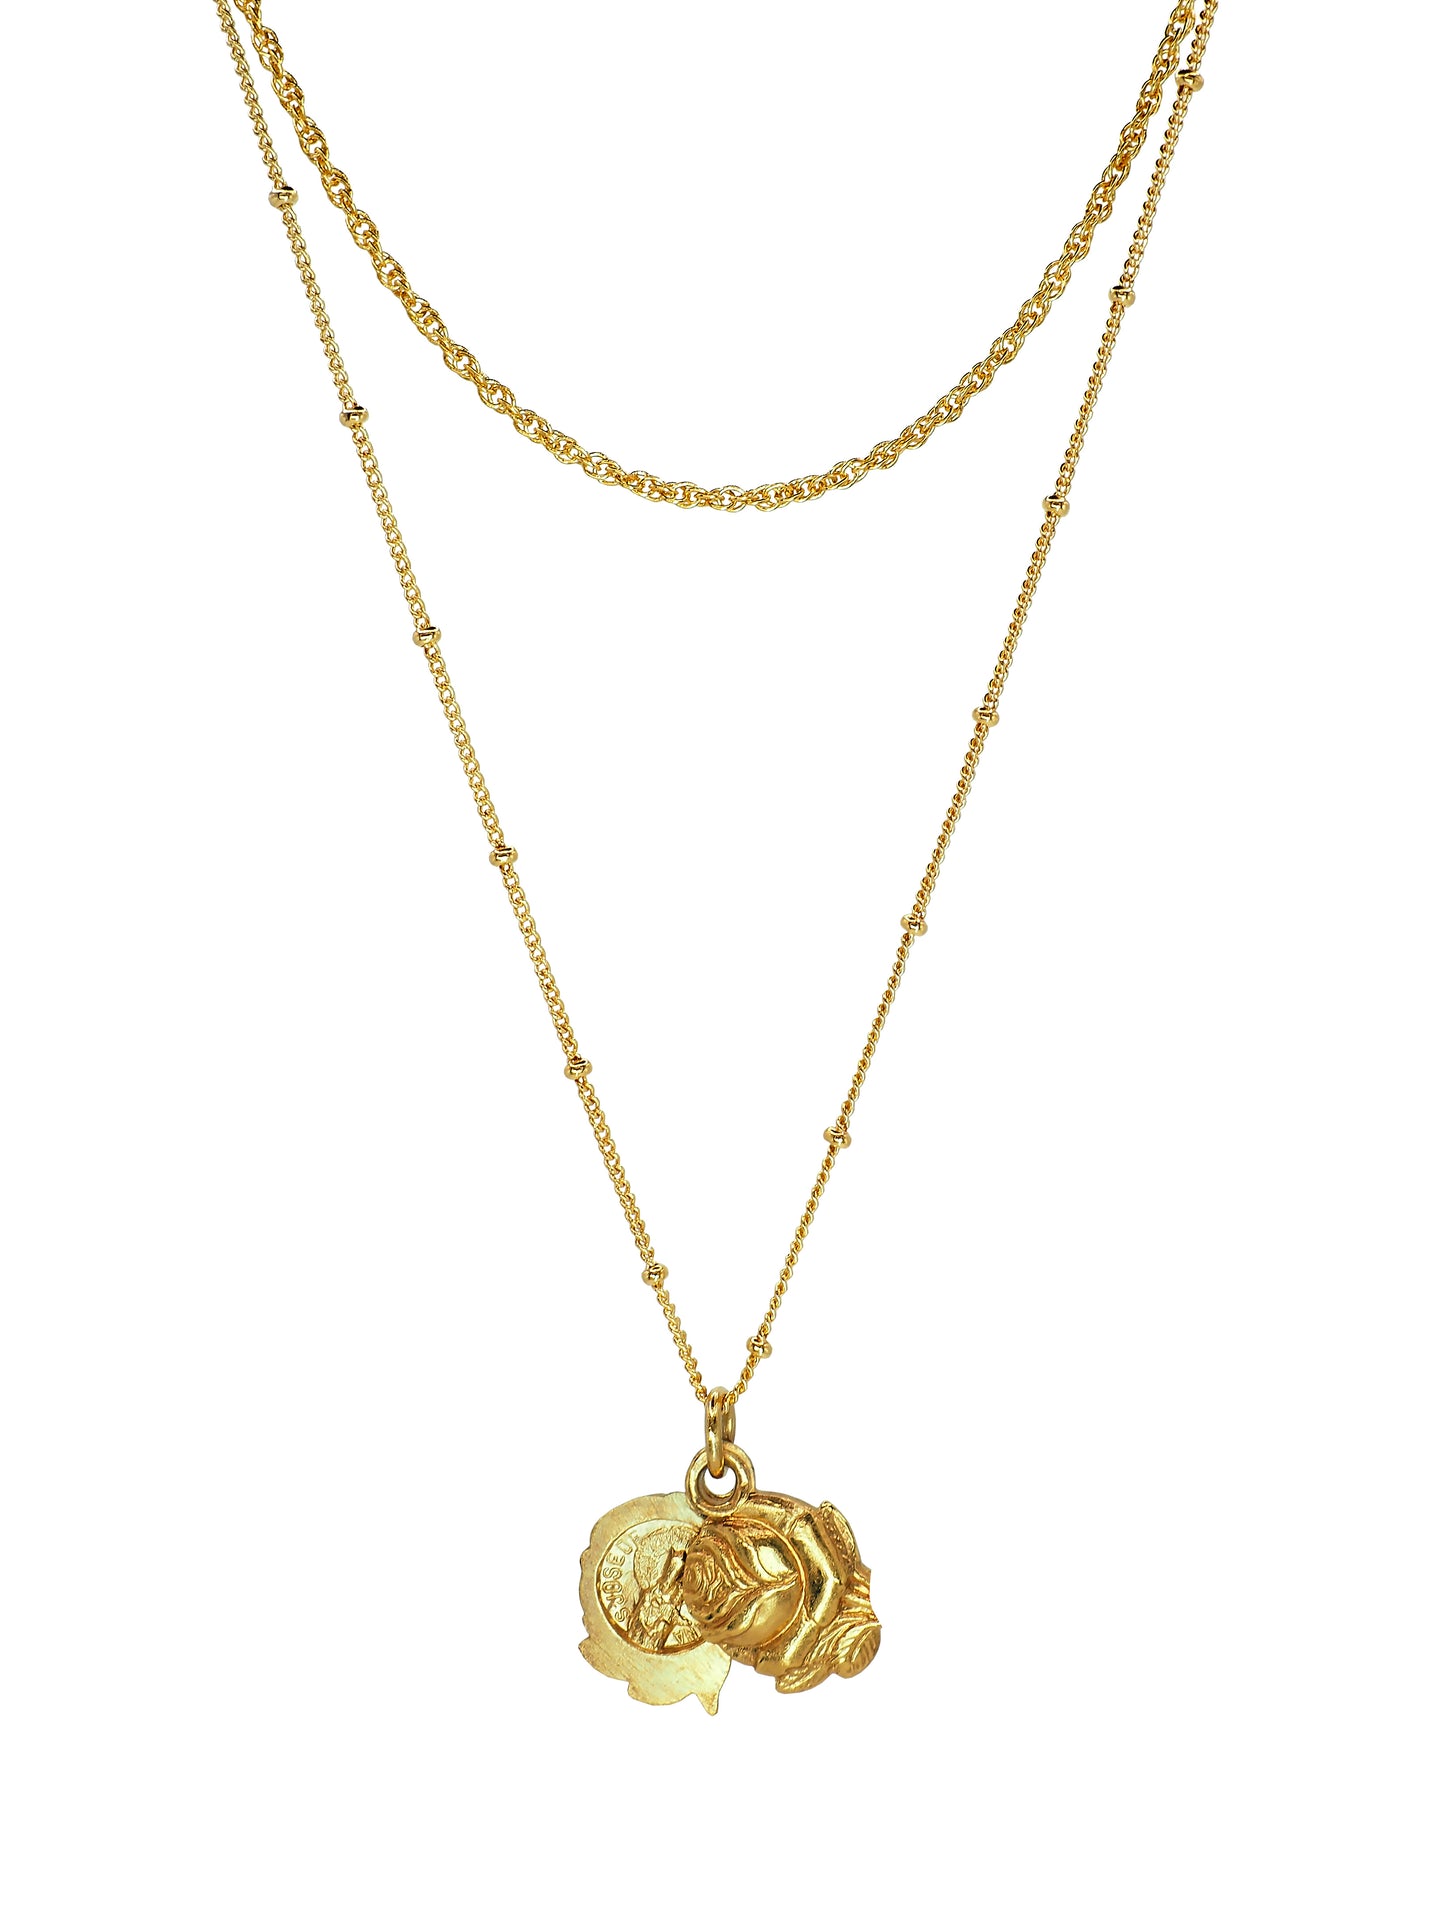 Rose Reliquary Necklace. Gold plated brass. One of a Kind.